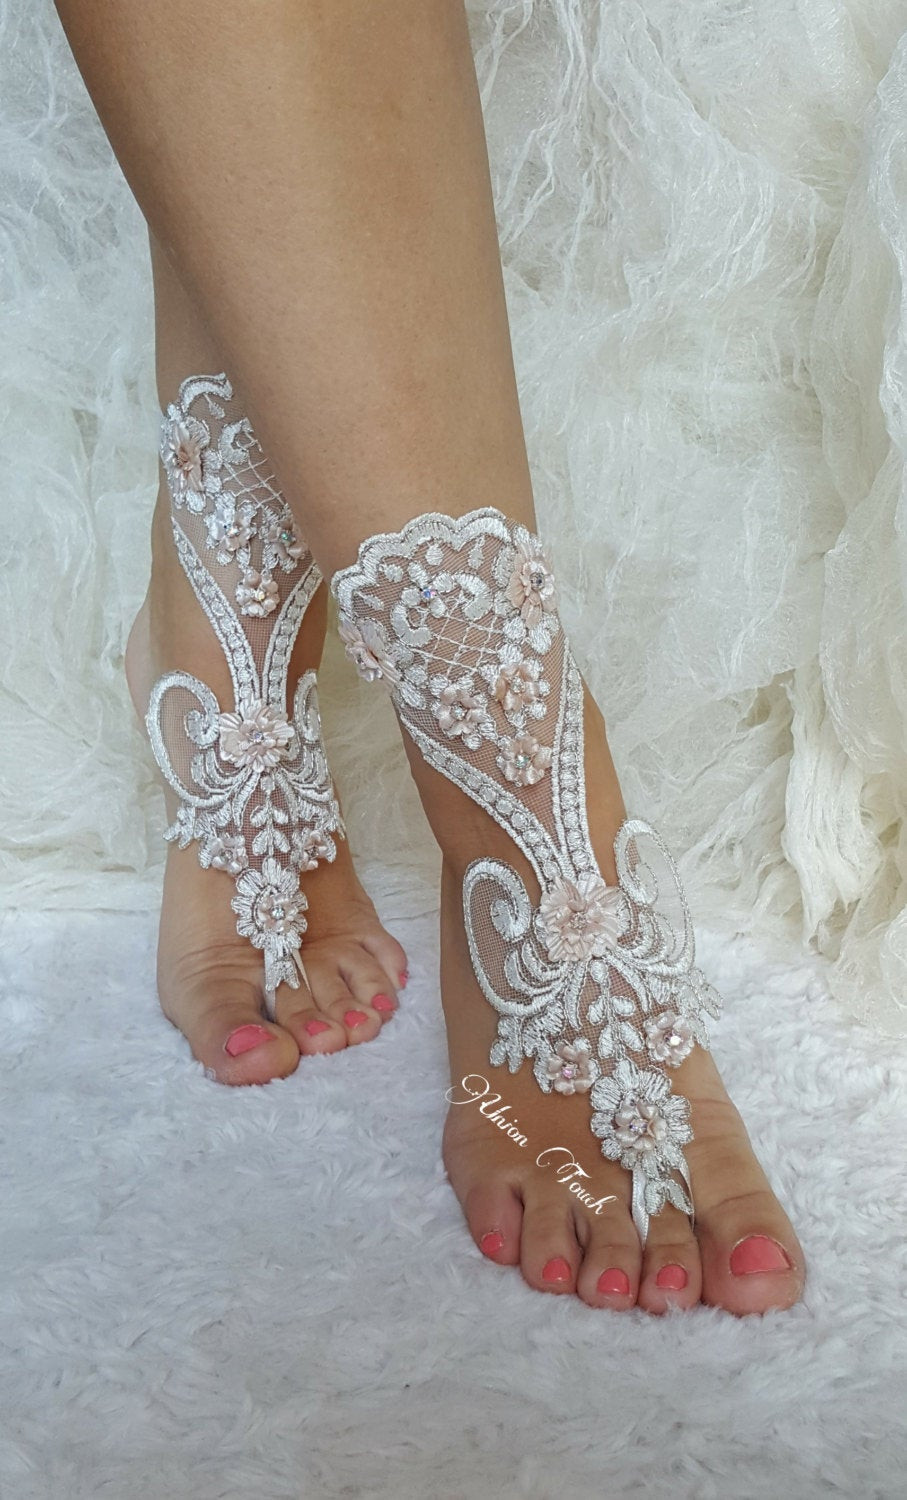 Beach Wedding Sandals
 Ivory Silver Lace Barefoot Beach wedding barefoot sandals